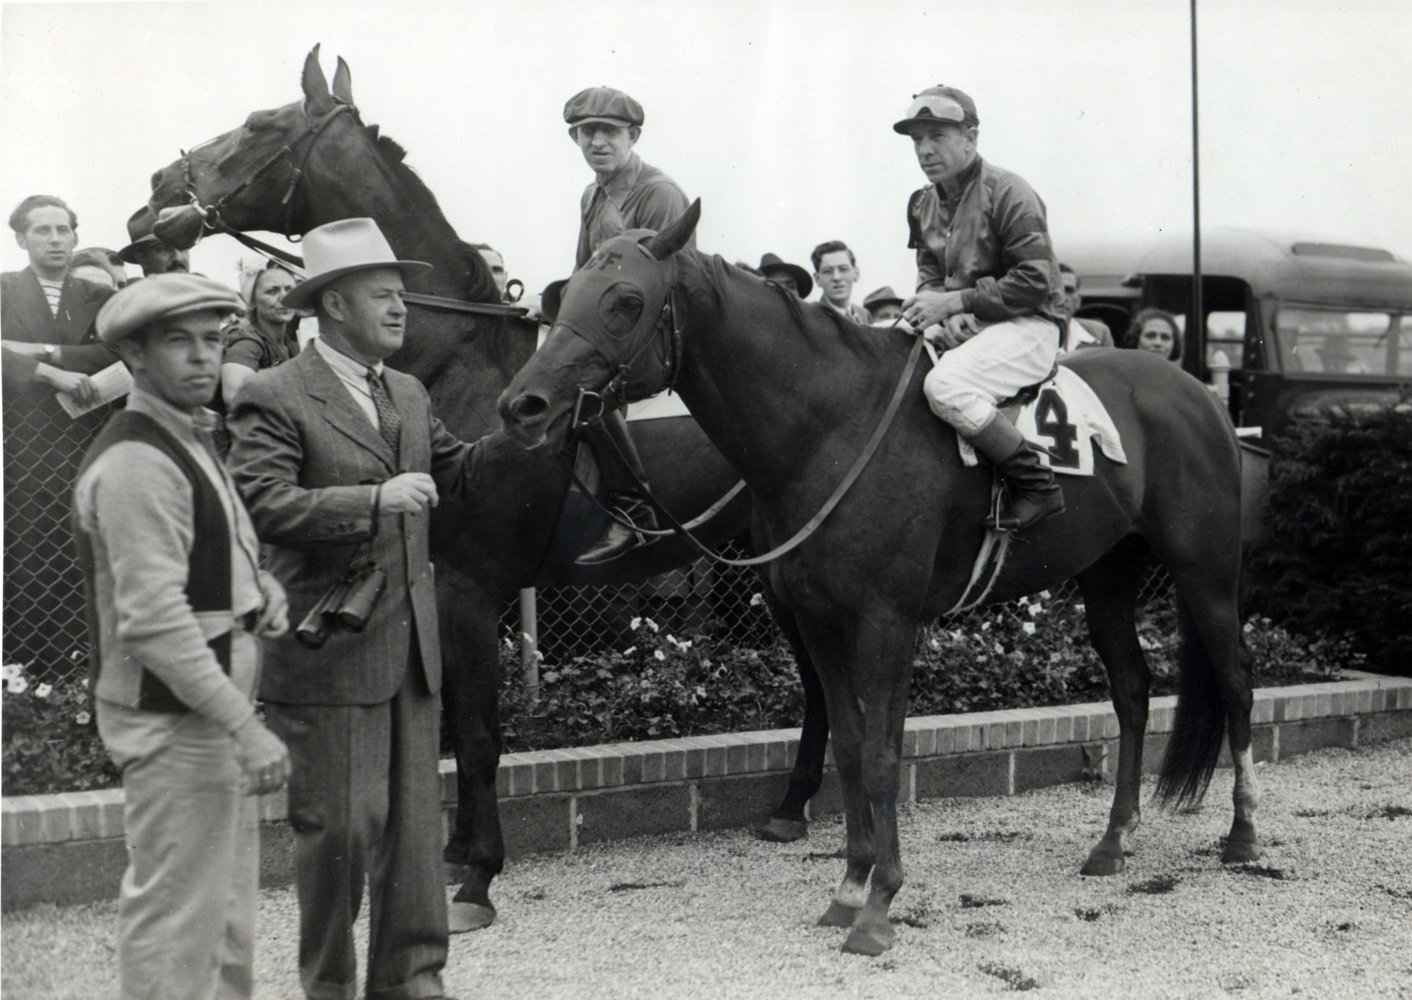 George Woolf and Whirlaway in the winner's circle in 1942 (Museum Collection)